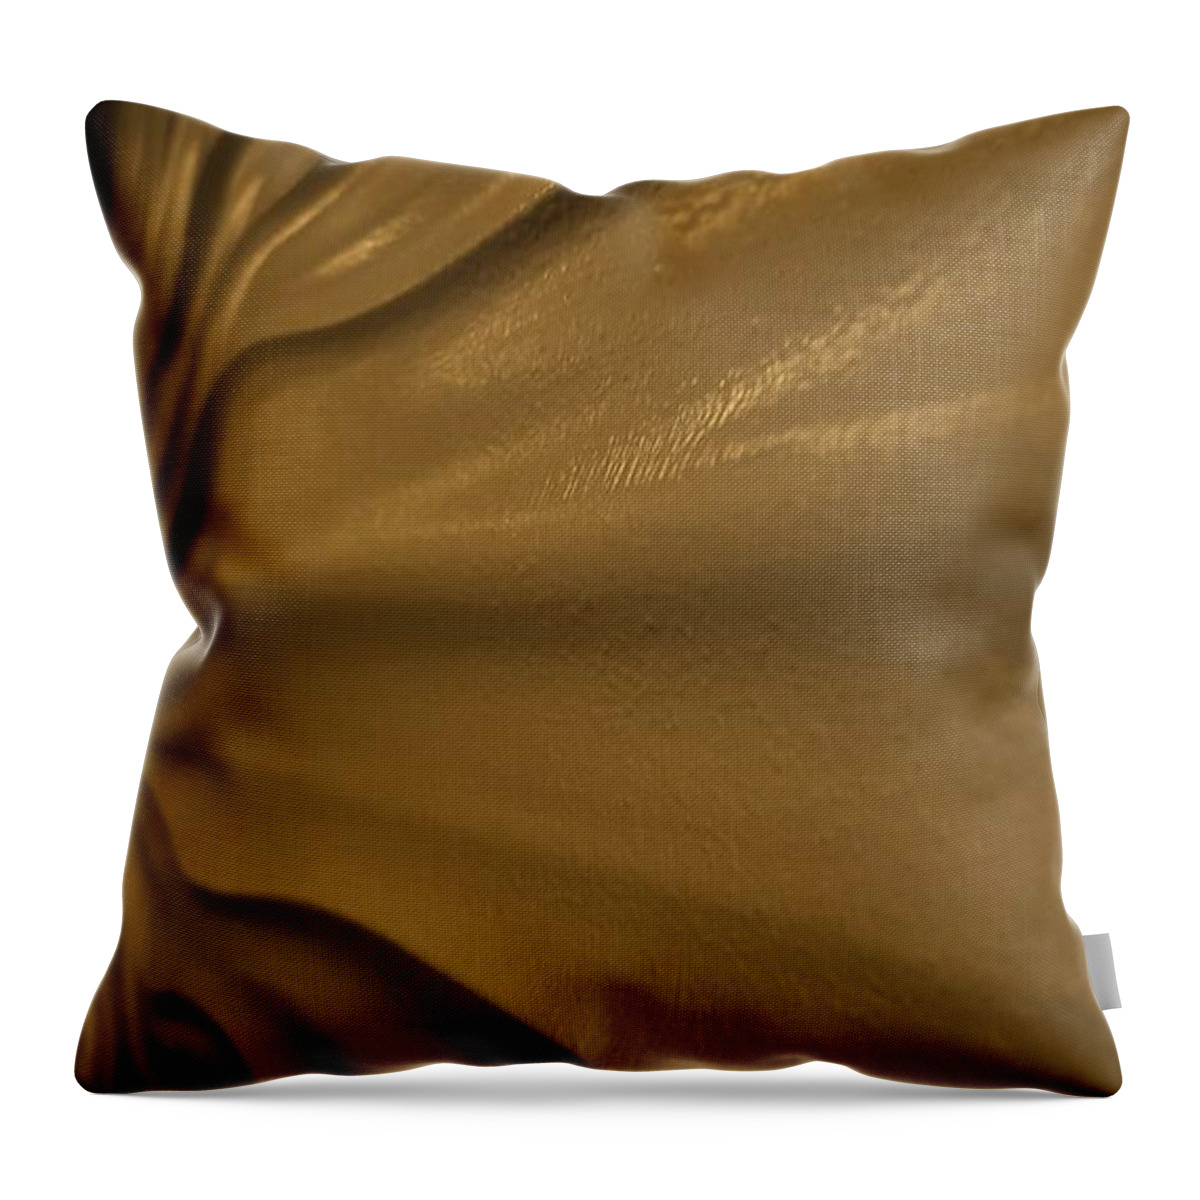 Walls Throw Pillow featuring the photograph Wavy Wall Chocolate by Rob Hans